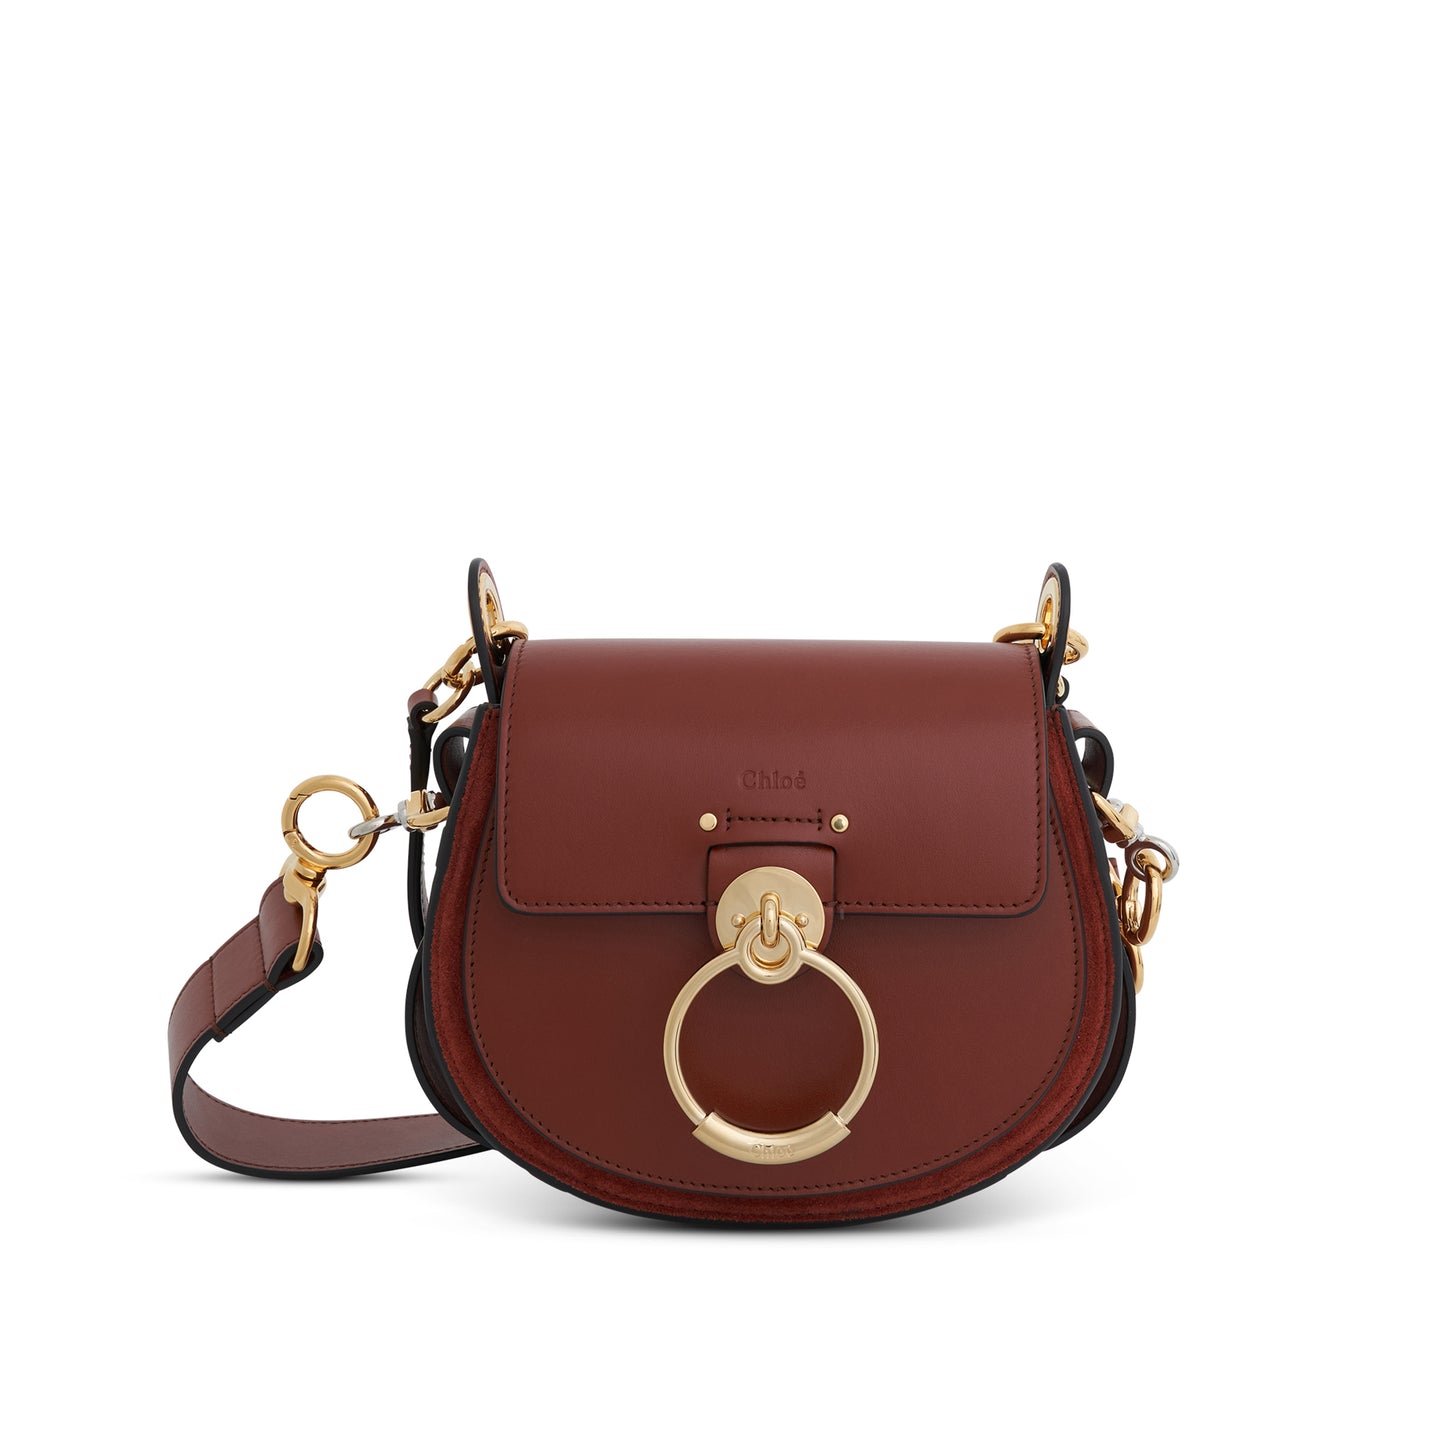 Small Tess Day Bag in Shiny & Suede Calfskin in Sepia Brown